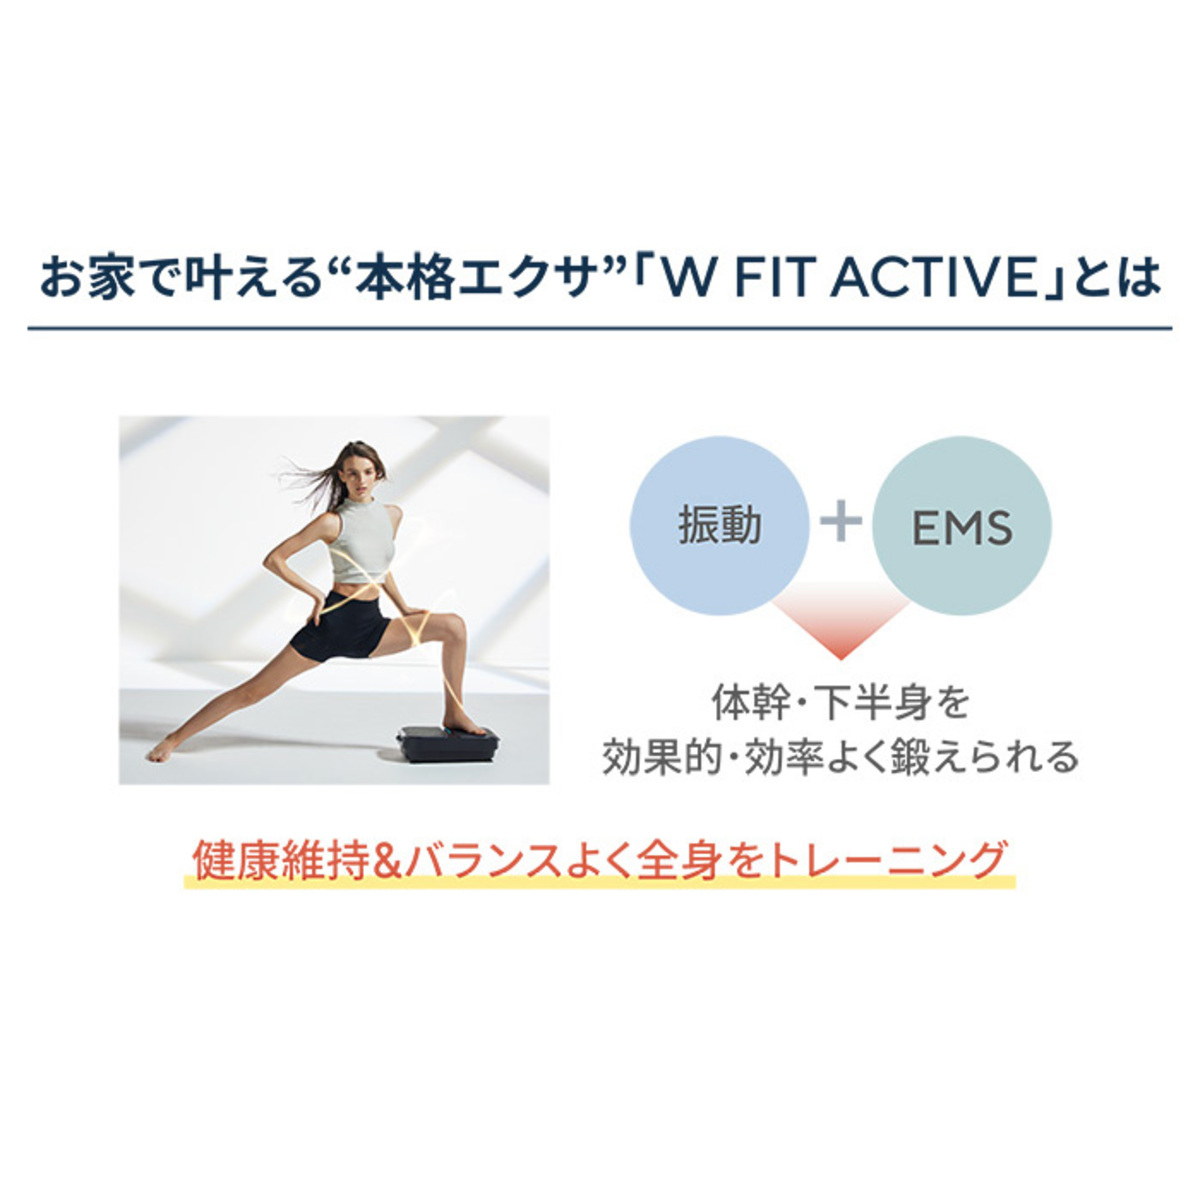 MYTREX W FIT ACTIVE マイトレックス（MYTREX） - QVC.jp